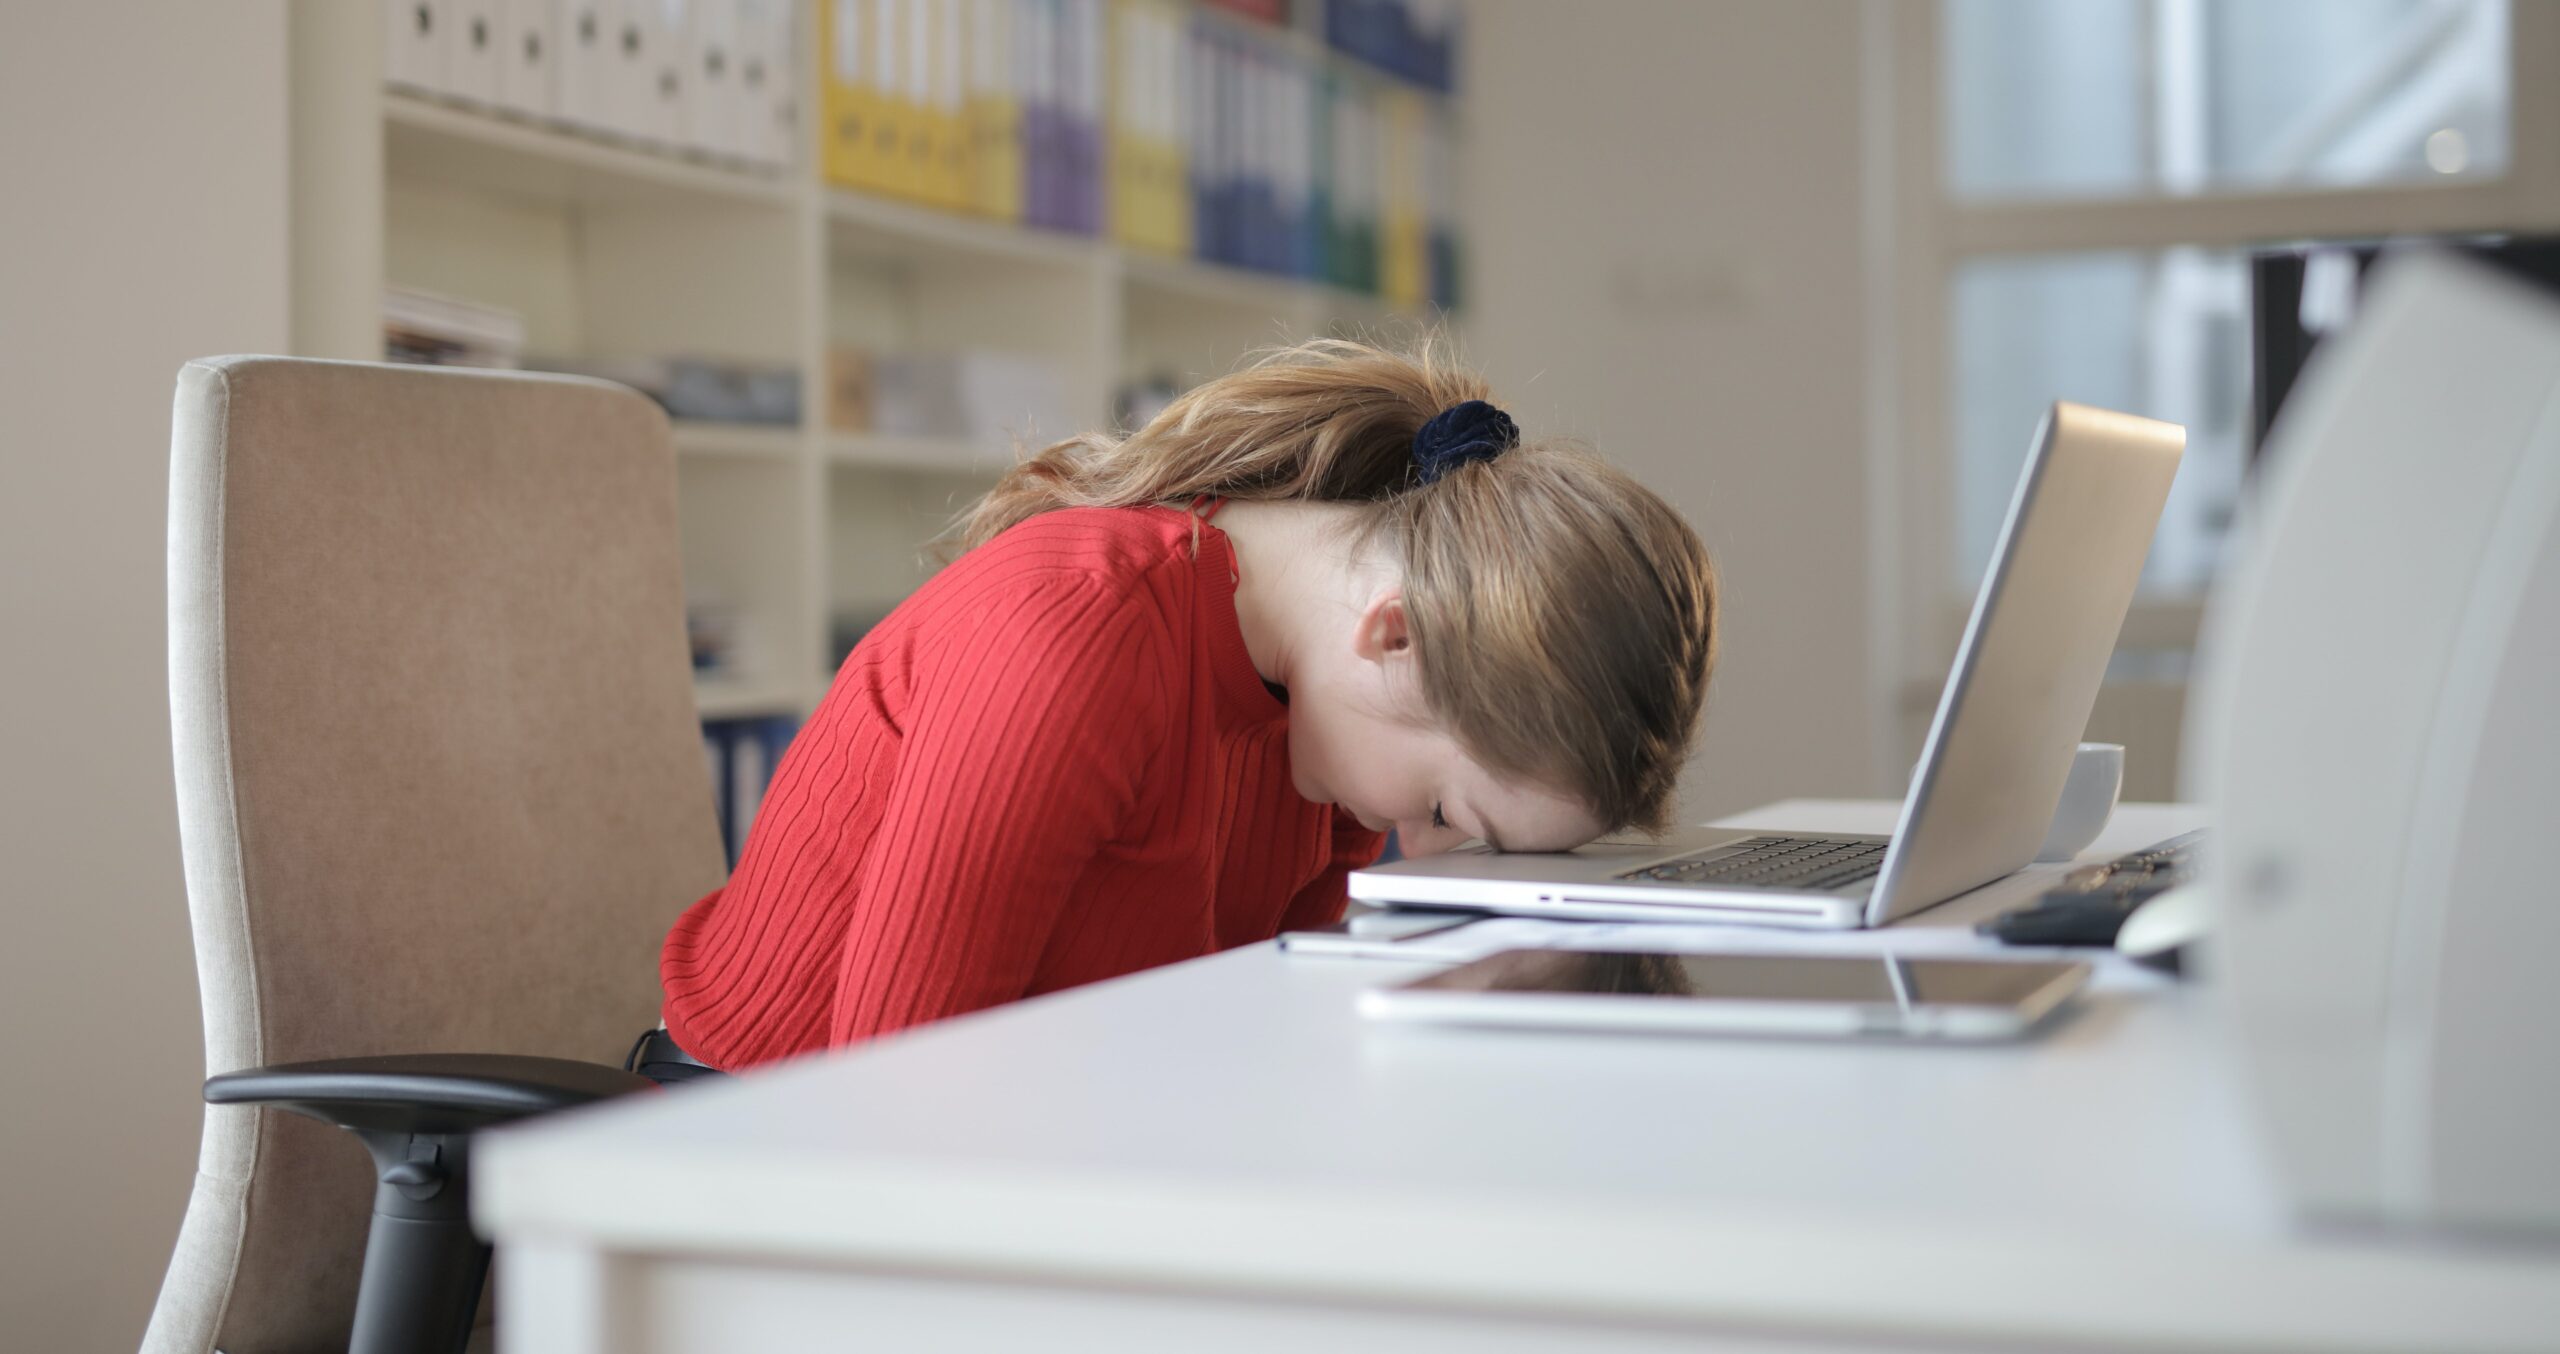 How to recognise and manage teacher burnout